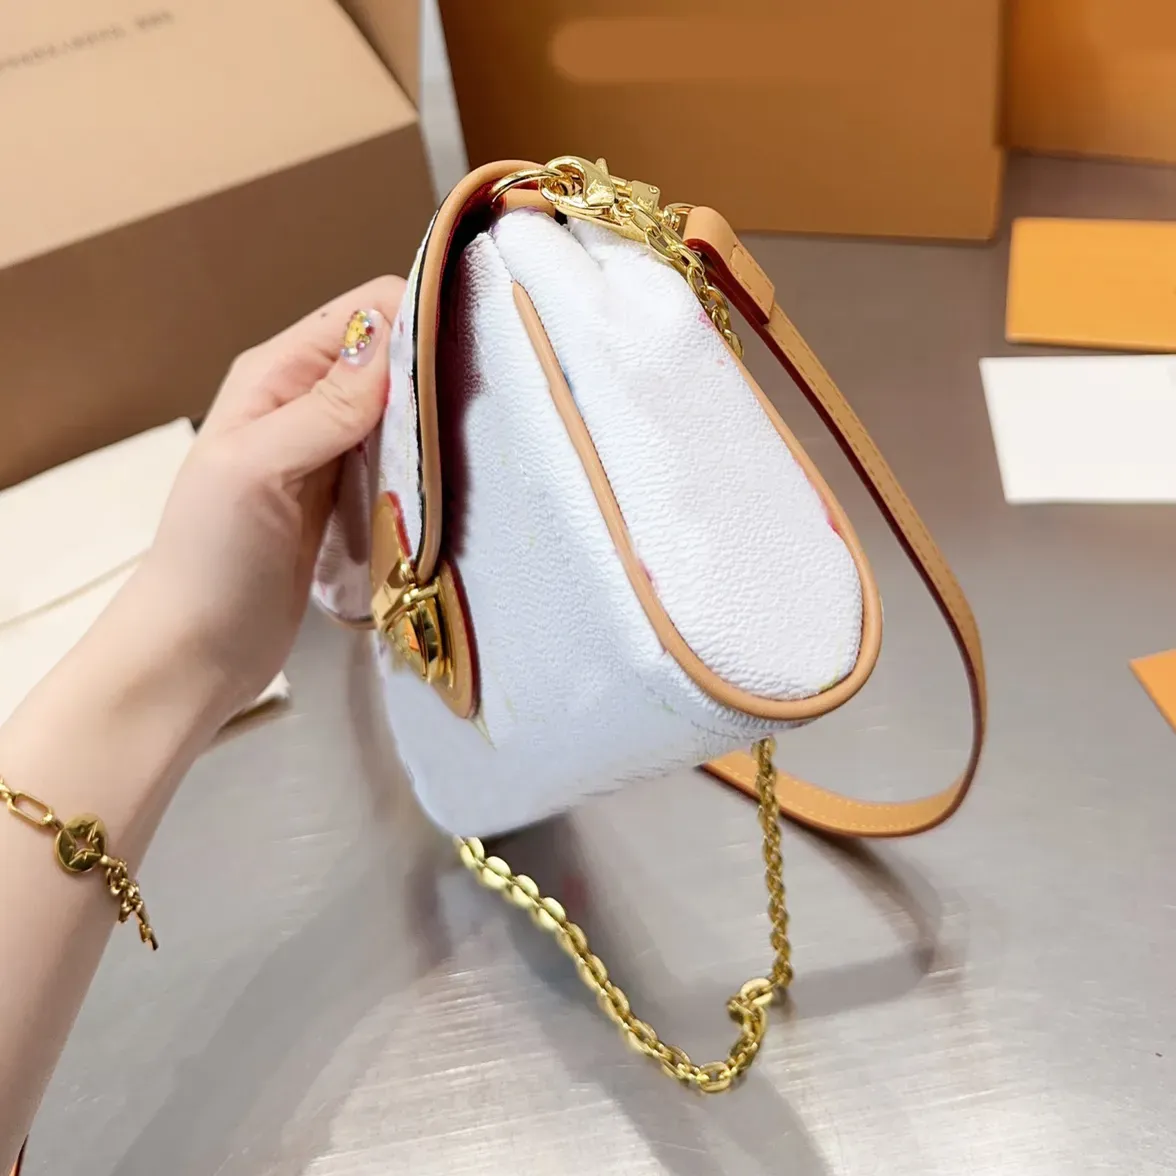 Chanel 5A Shoulder Bag Luxury Chain Crossbody Purse With Retro Chain Strap  For Womens Fashion And Daily Use From Rainbowhandbag, $116.45 | DHgate.Com